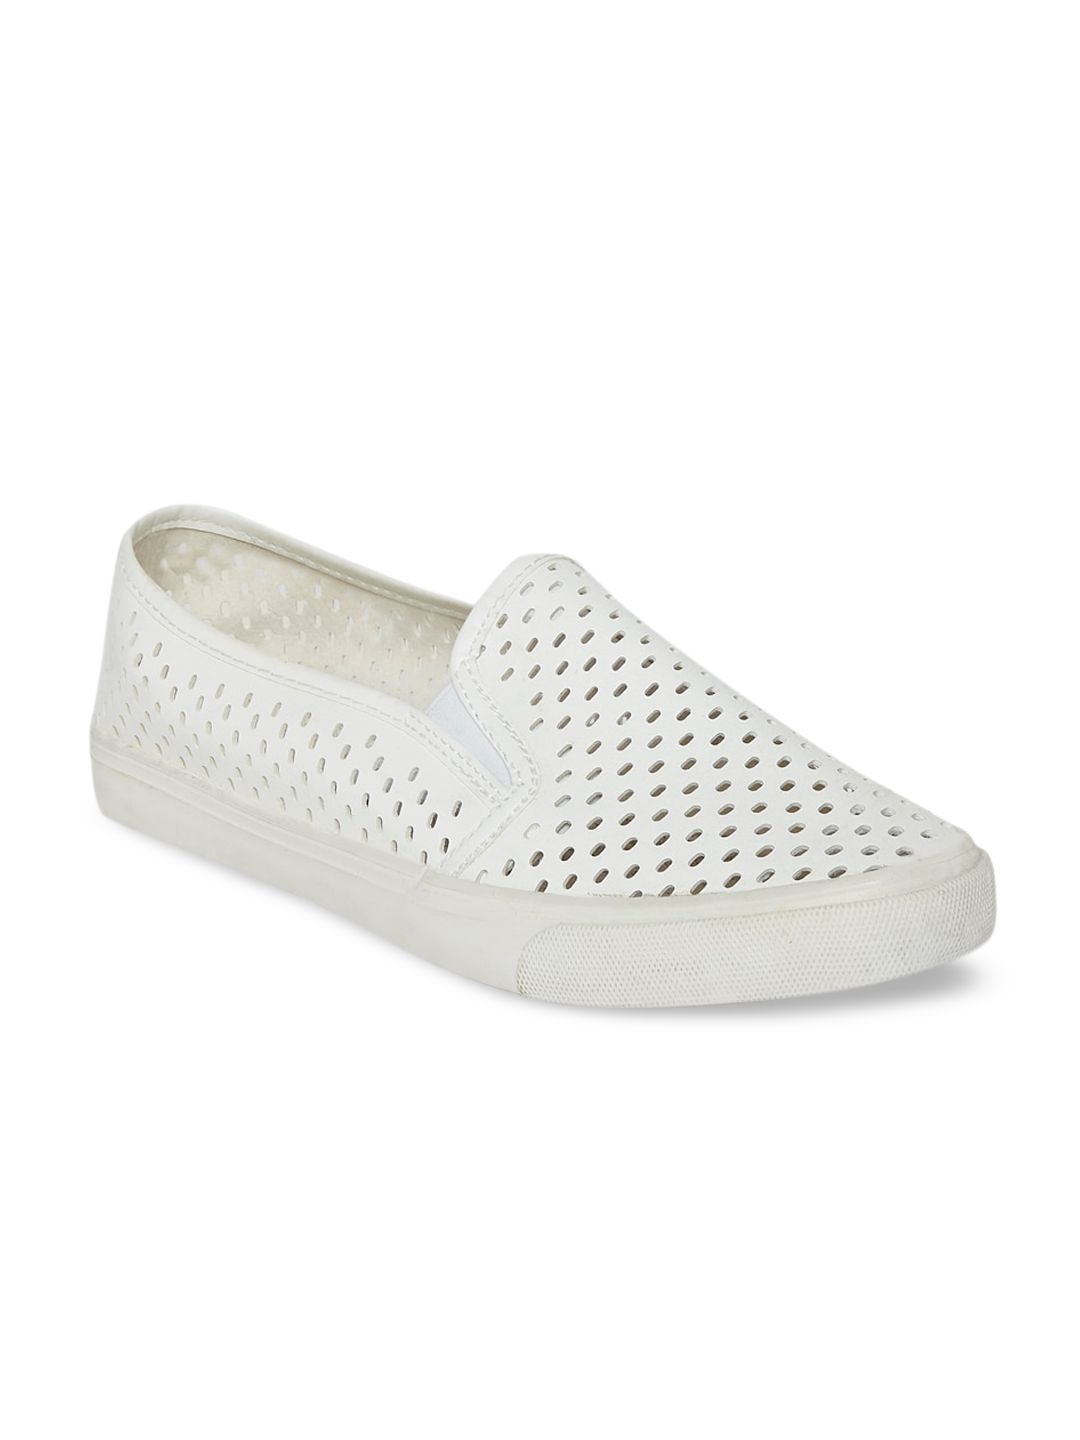 Forever Glam by Pantaloons Women White Perforations Slip-On Sneakers Price in India